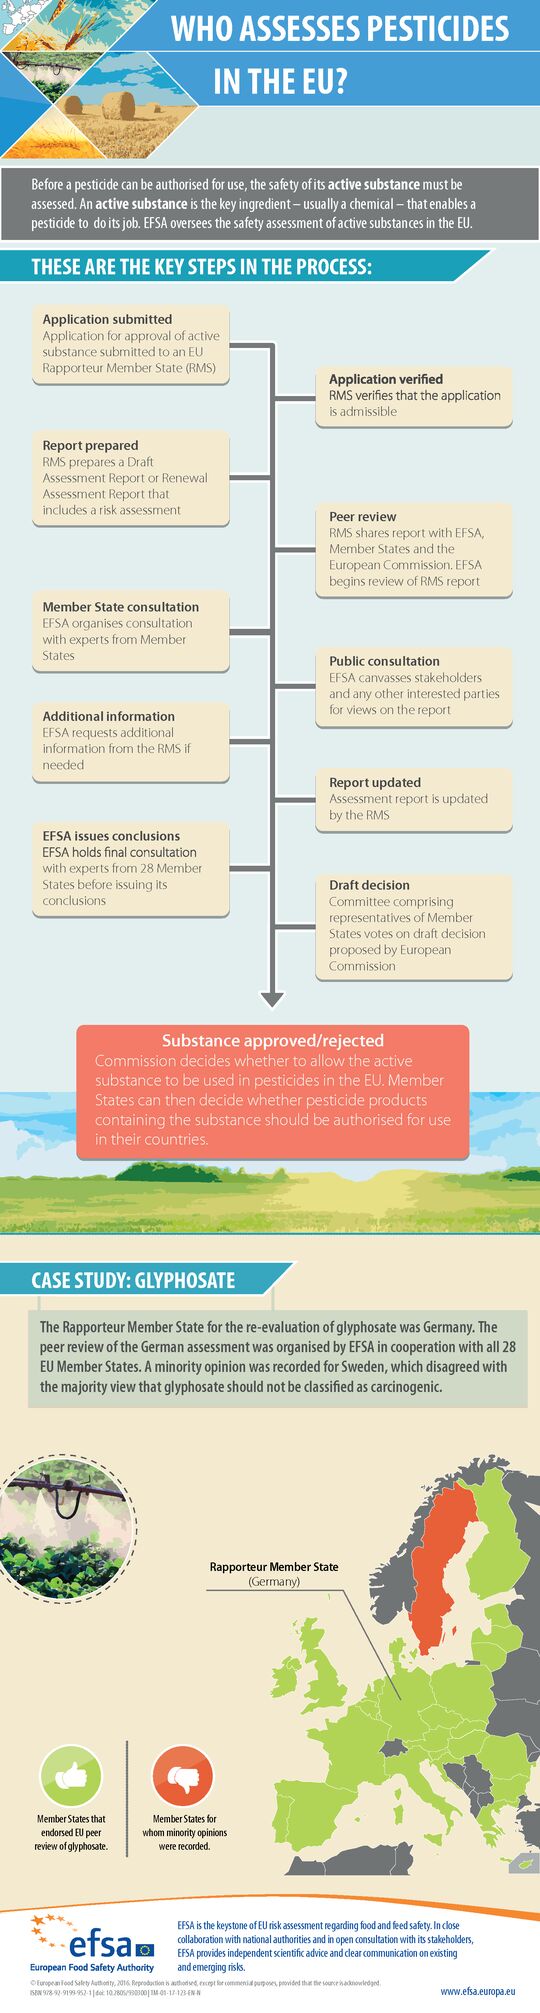 Who assesses pesticides in the EU?